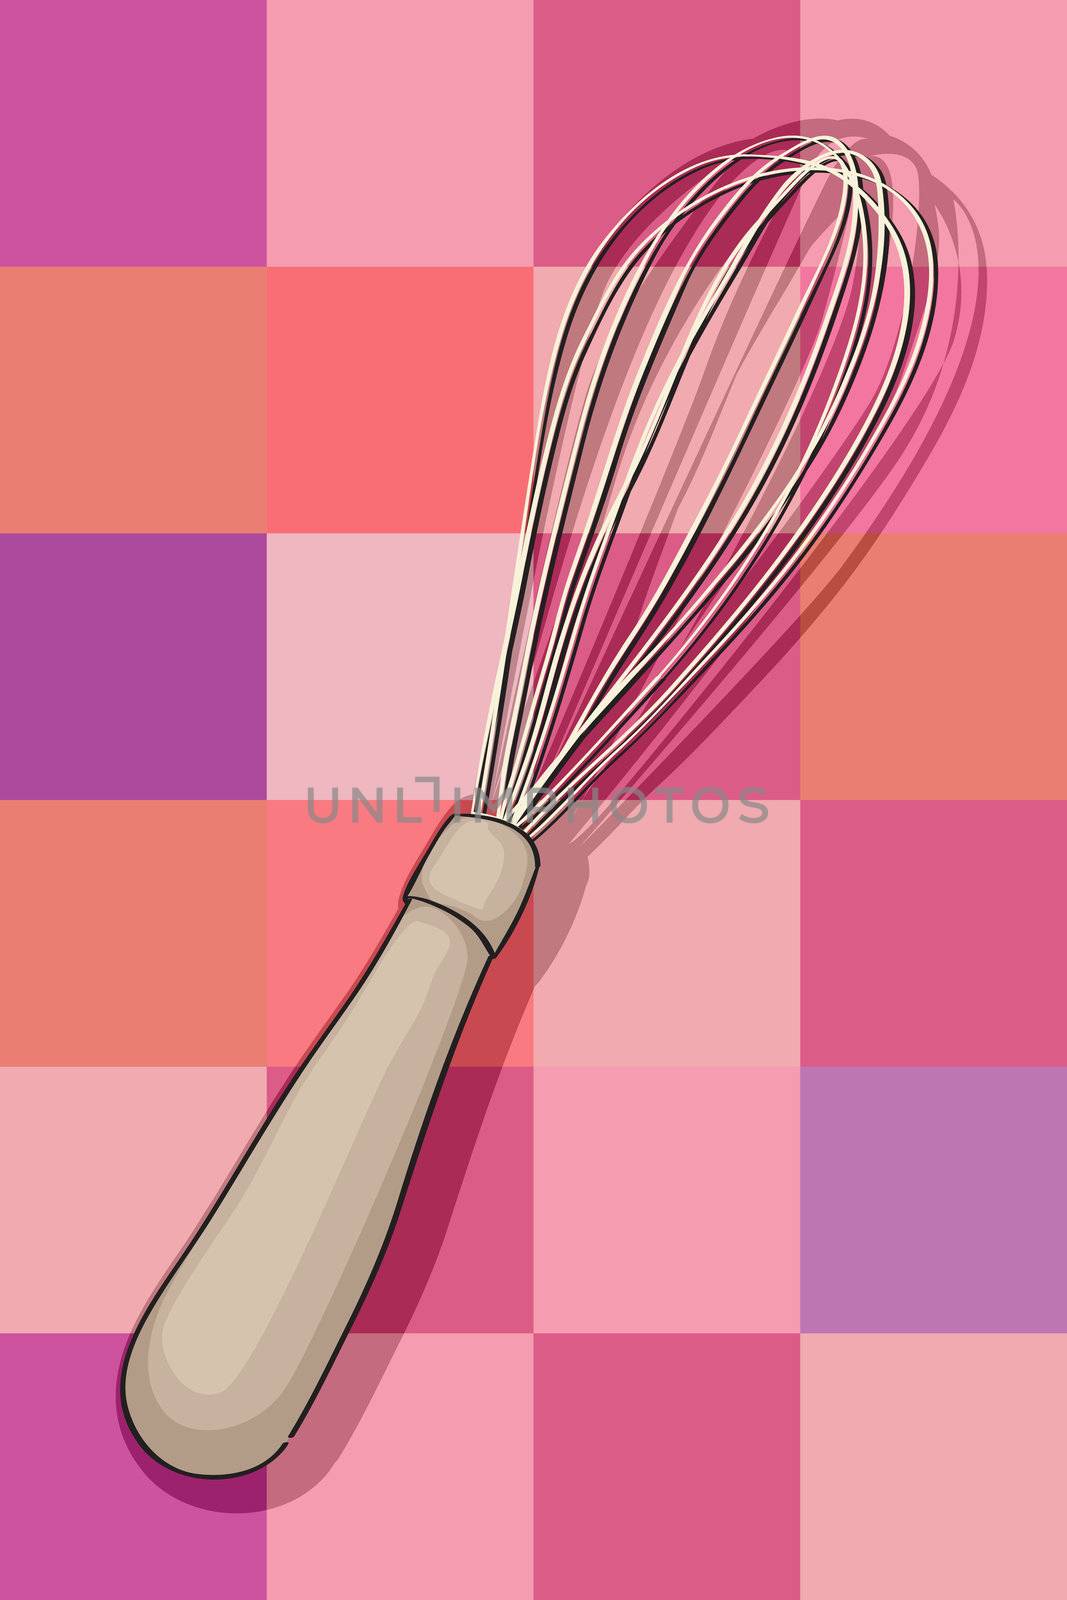 whisk by catacos